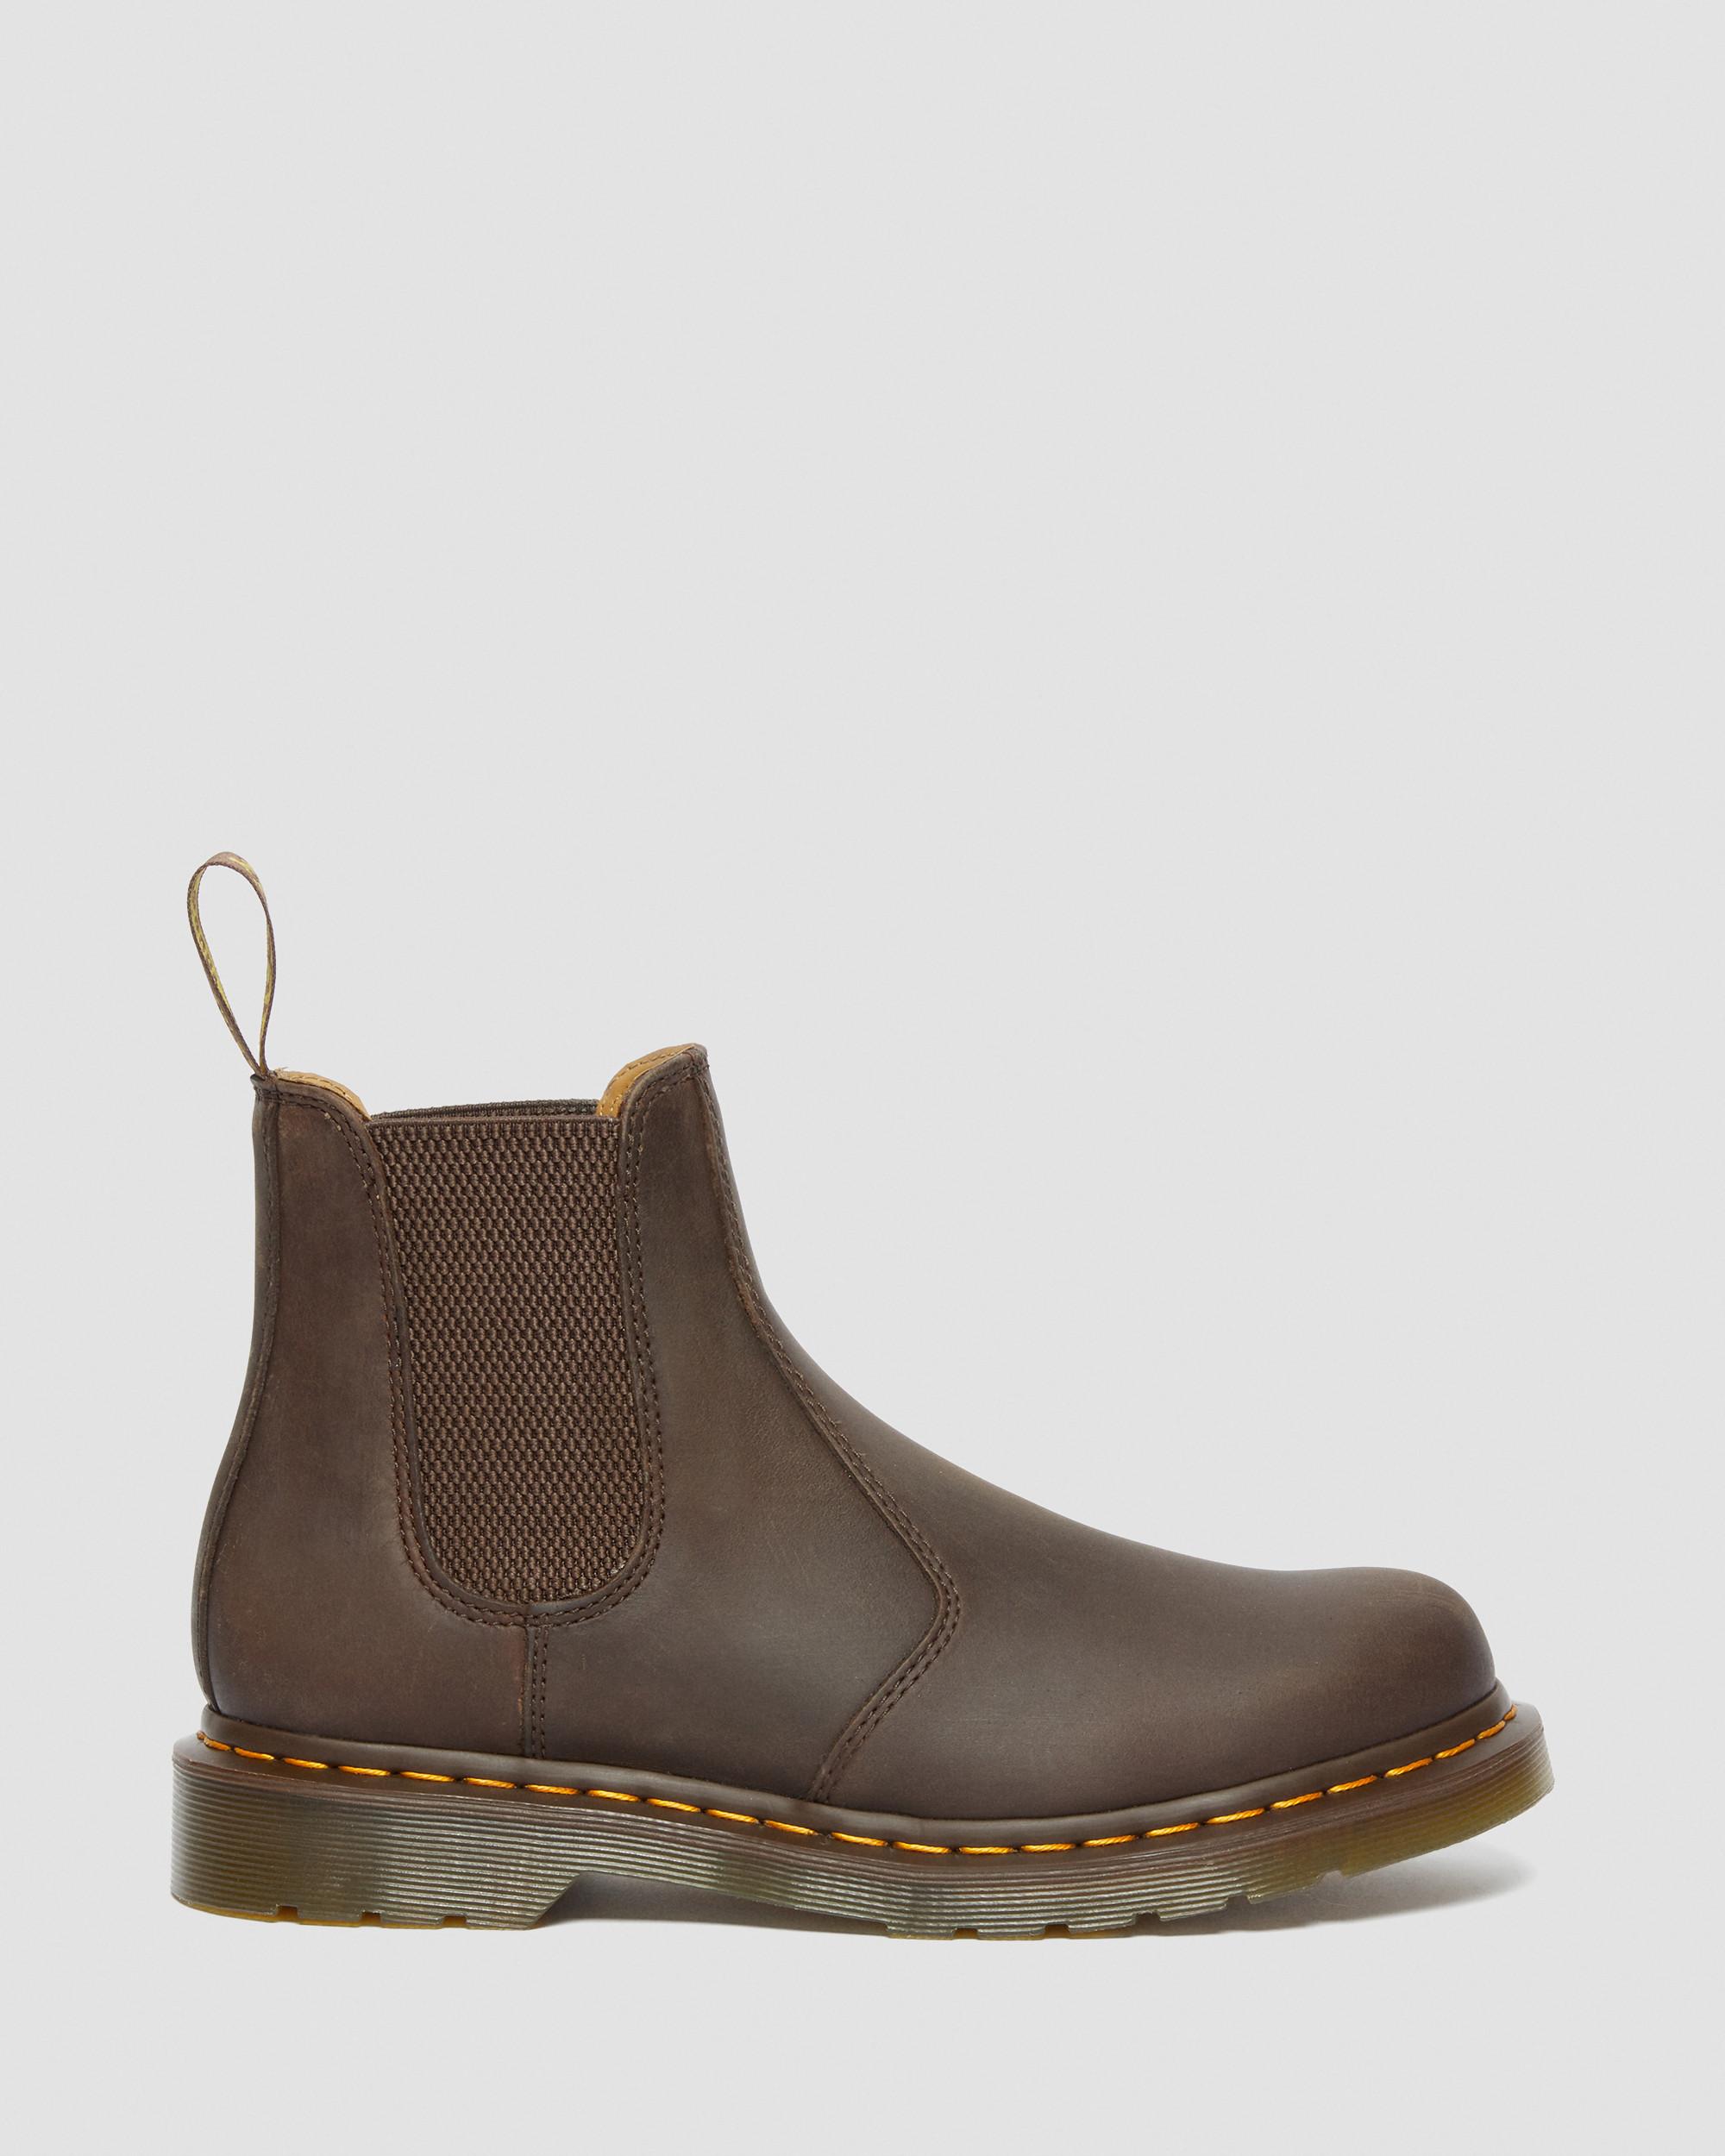 2976 Yellow Stitch Crazy Horse Leather Chelsea Boots | Dr. Martens